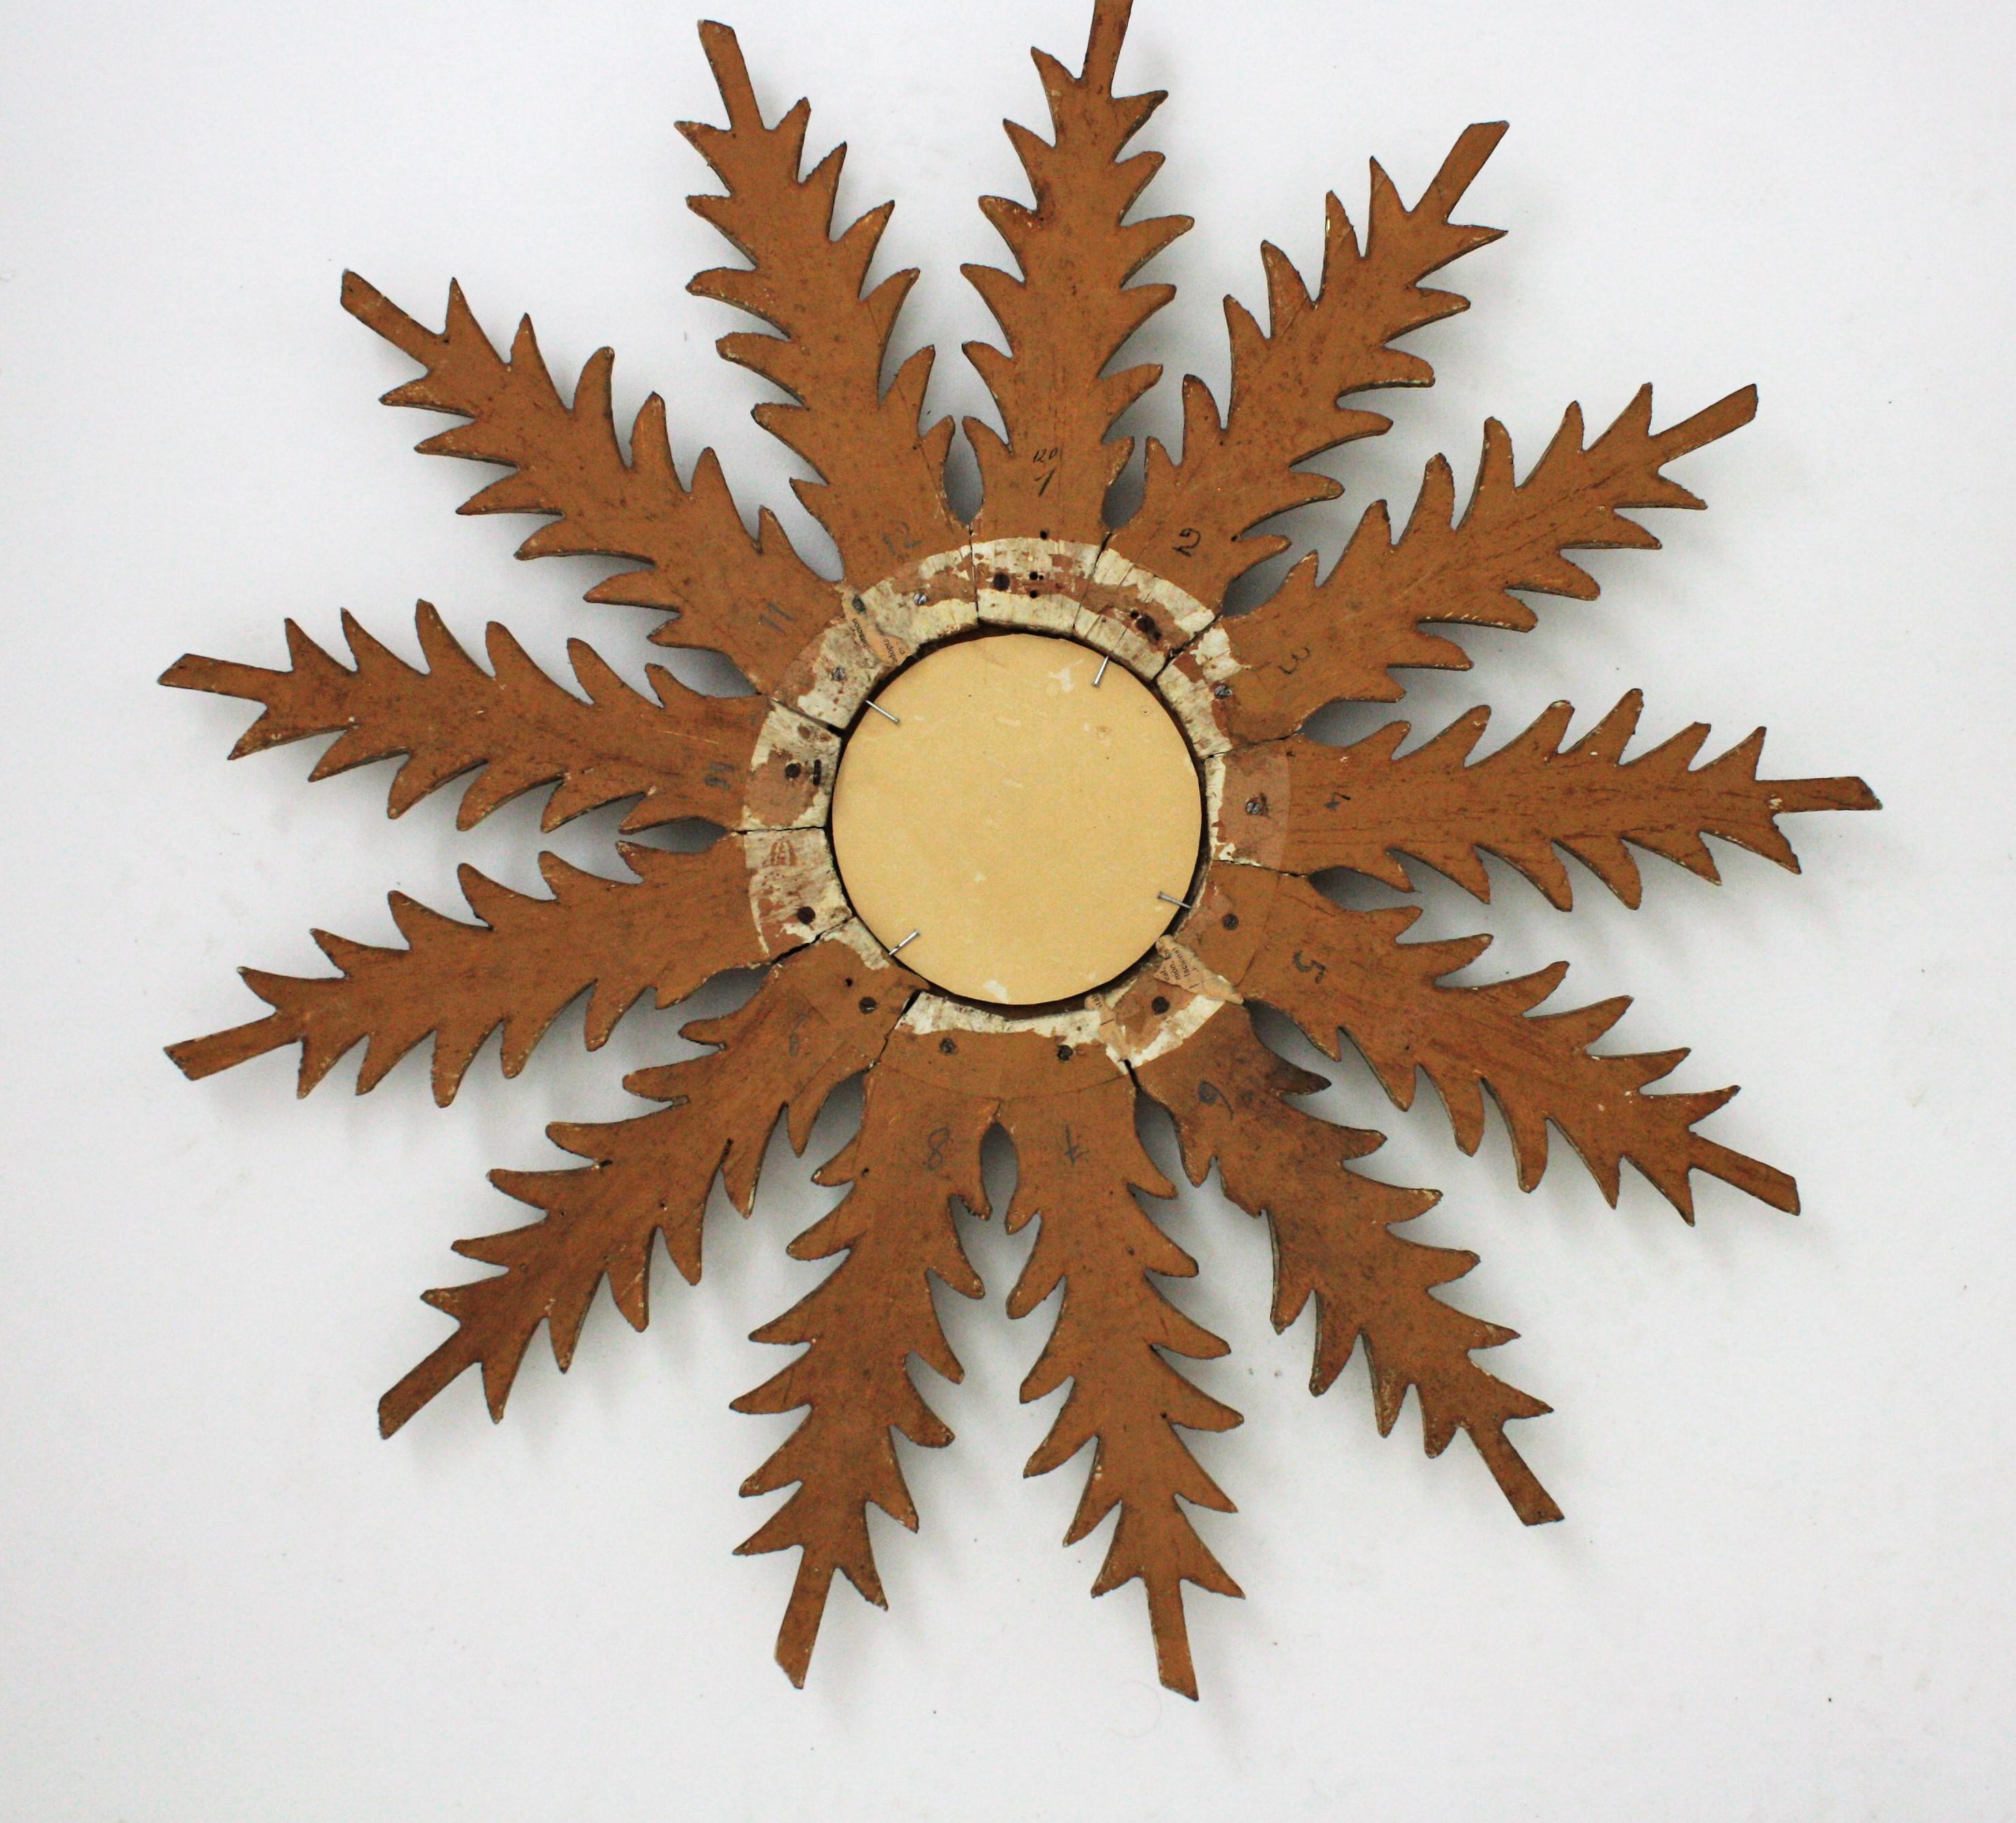 Sunburst Starburst Giltwood Mirror with Foliage Carvings, 1940s For Sale 4